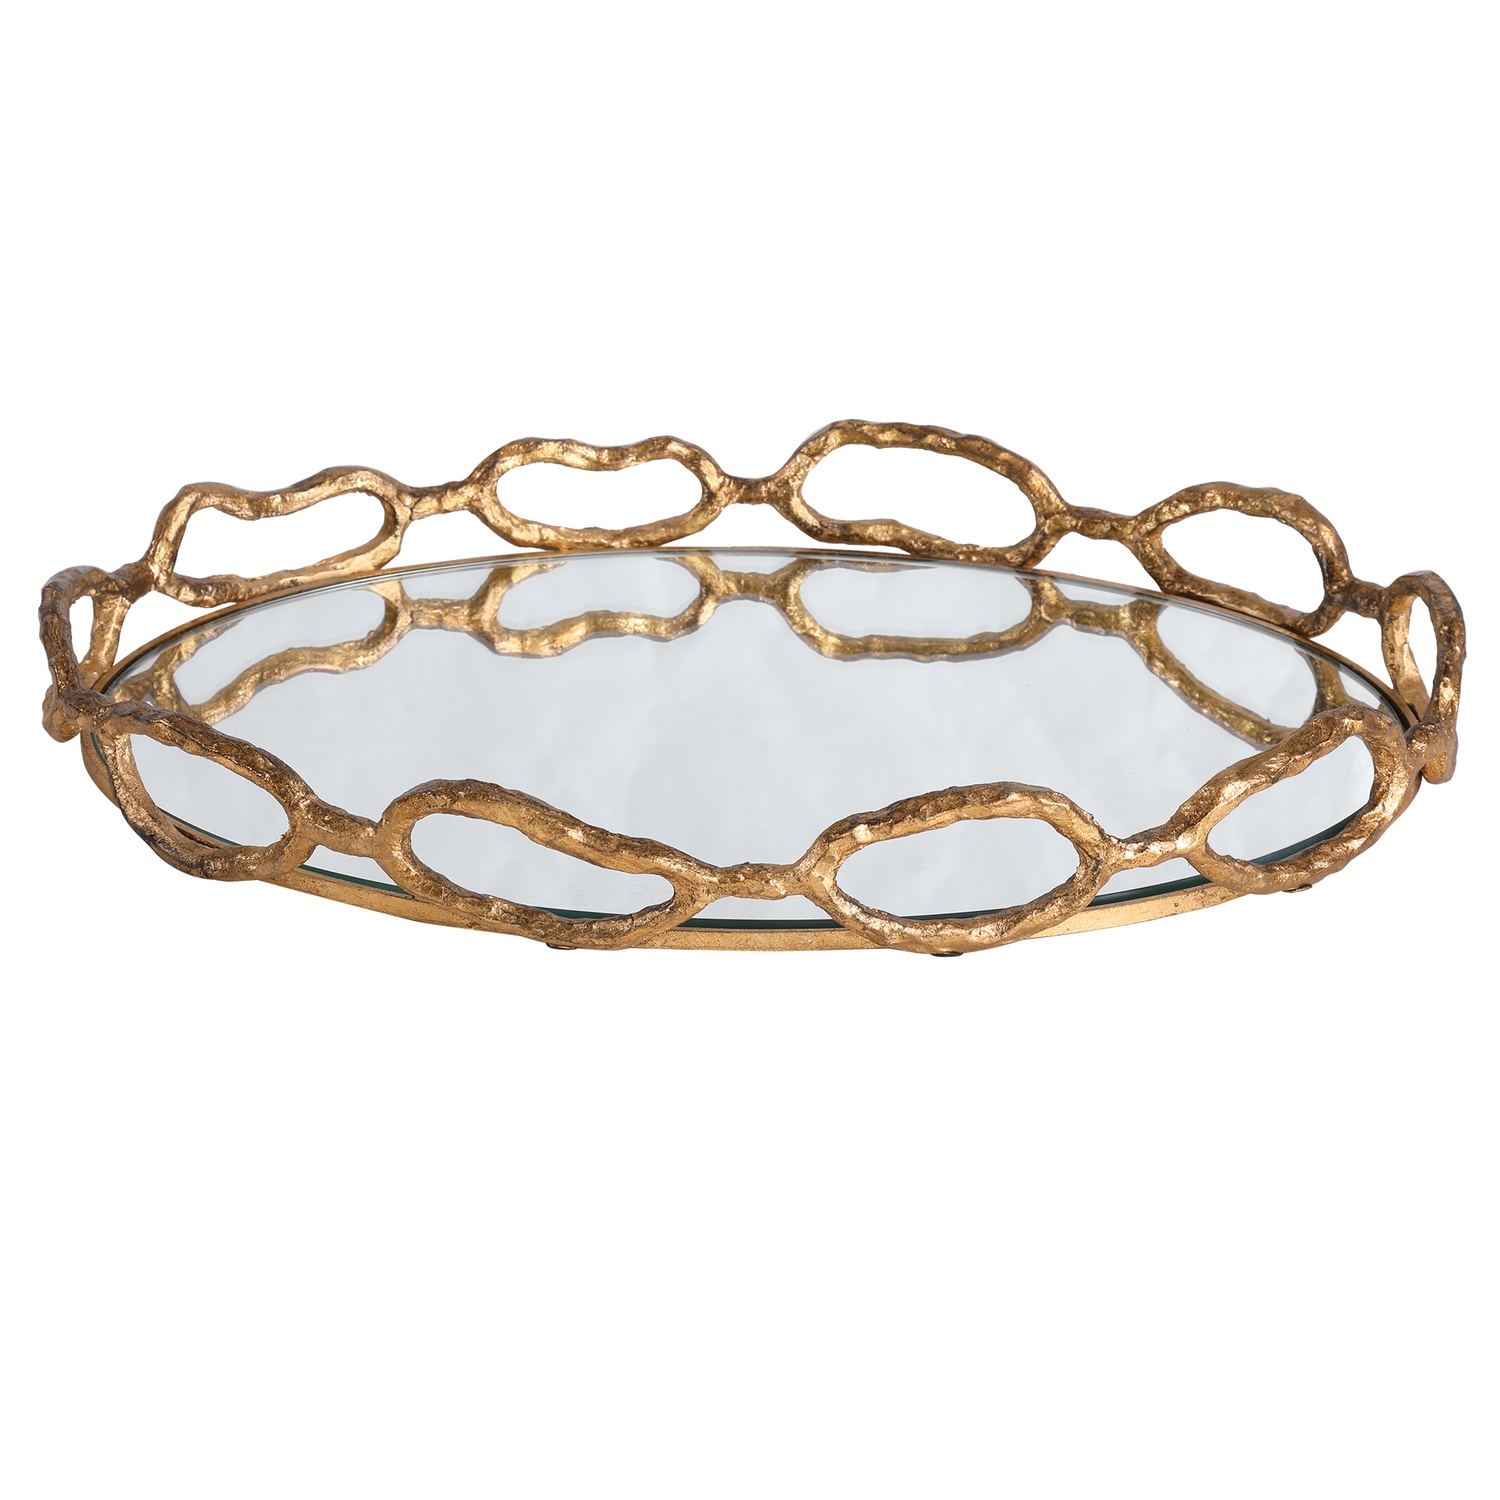 Cable-Decorative Bowls & Trays